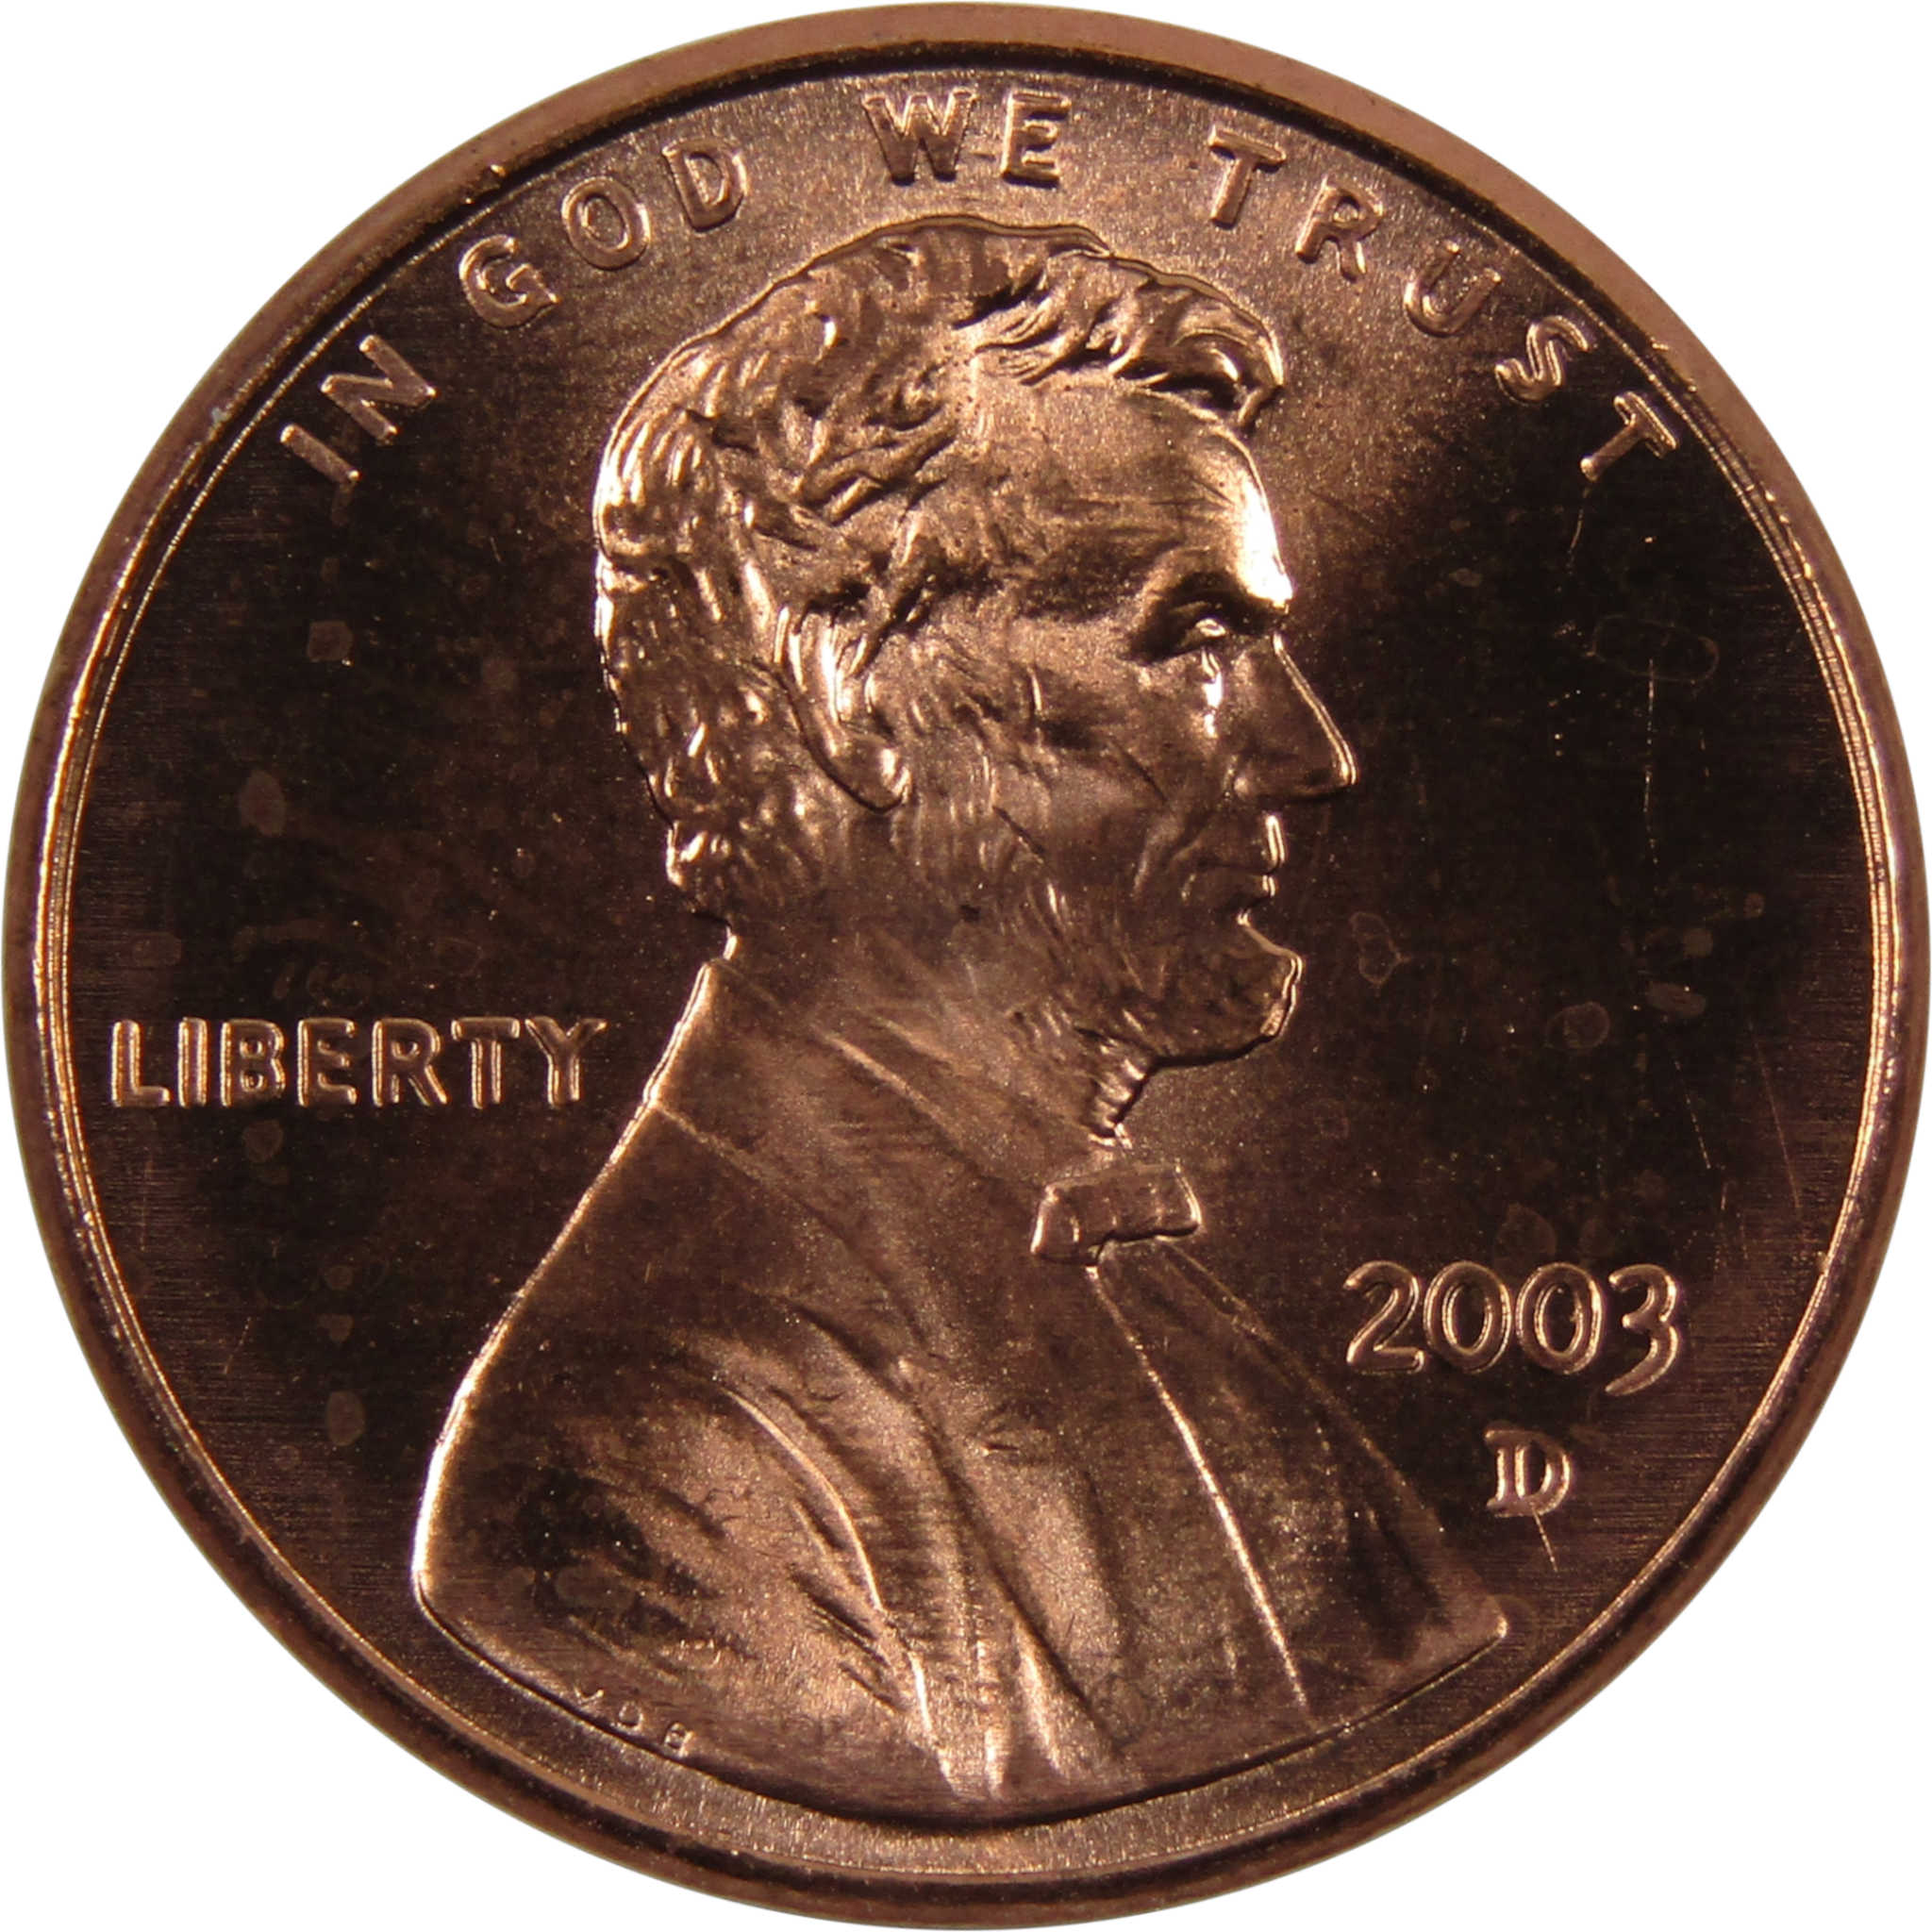 2003 D Lincoln Memorial Cent BU Uncirculated Penny 1c Coin